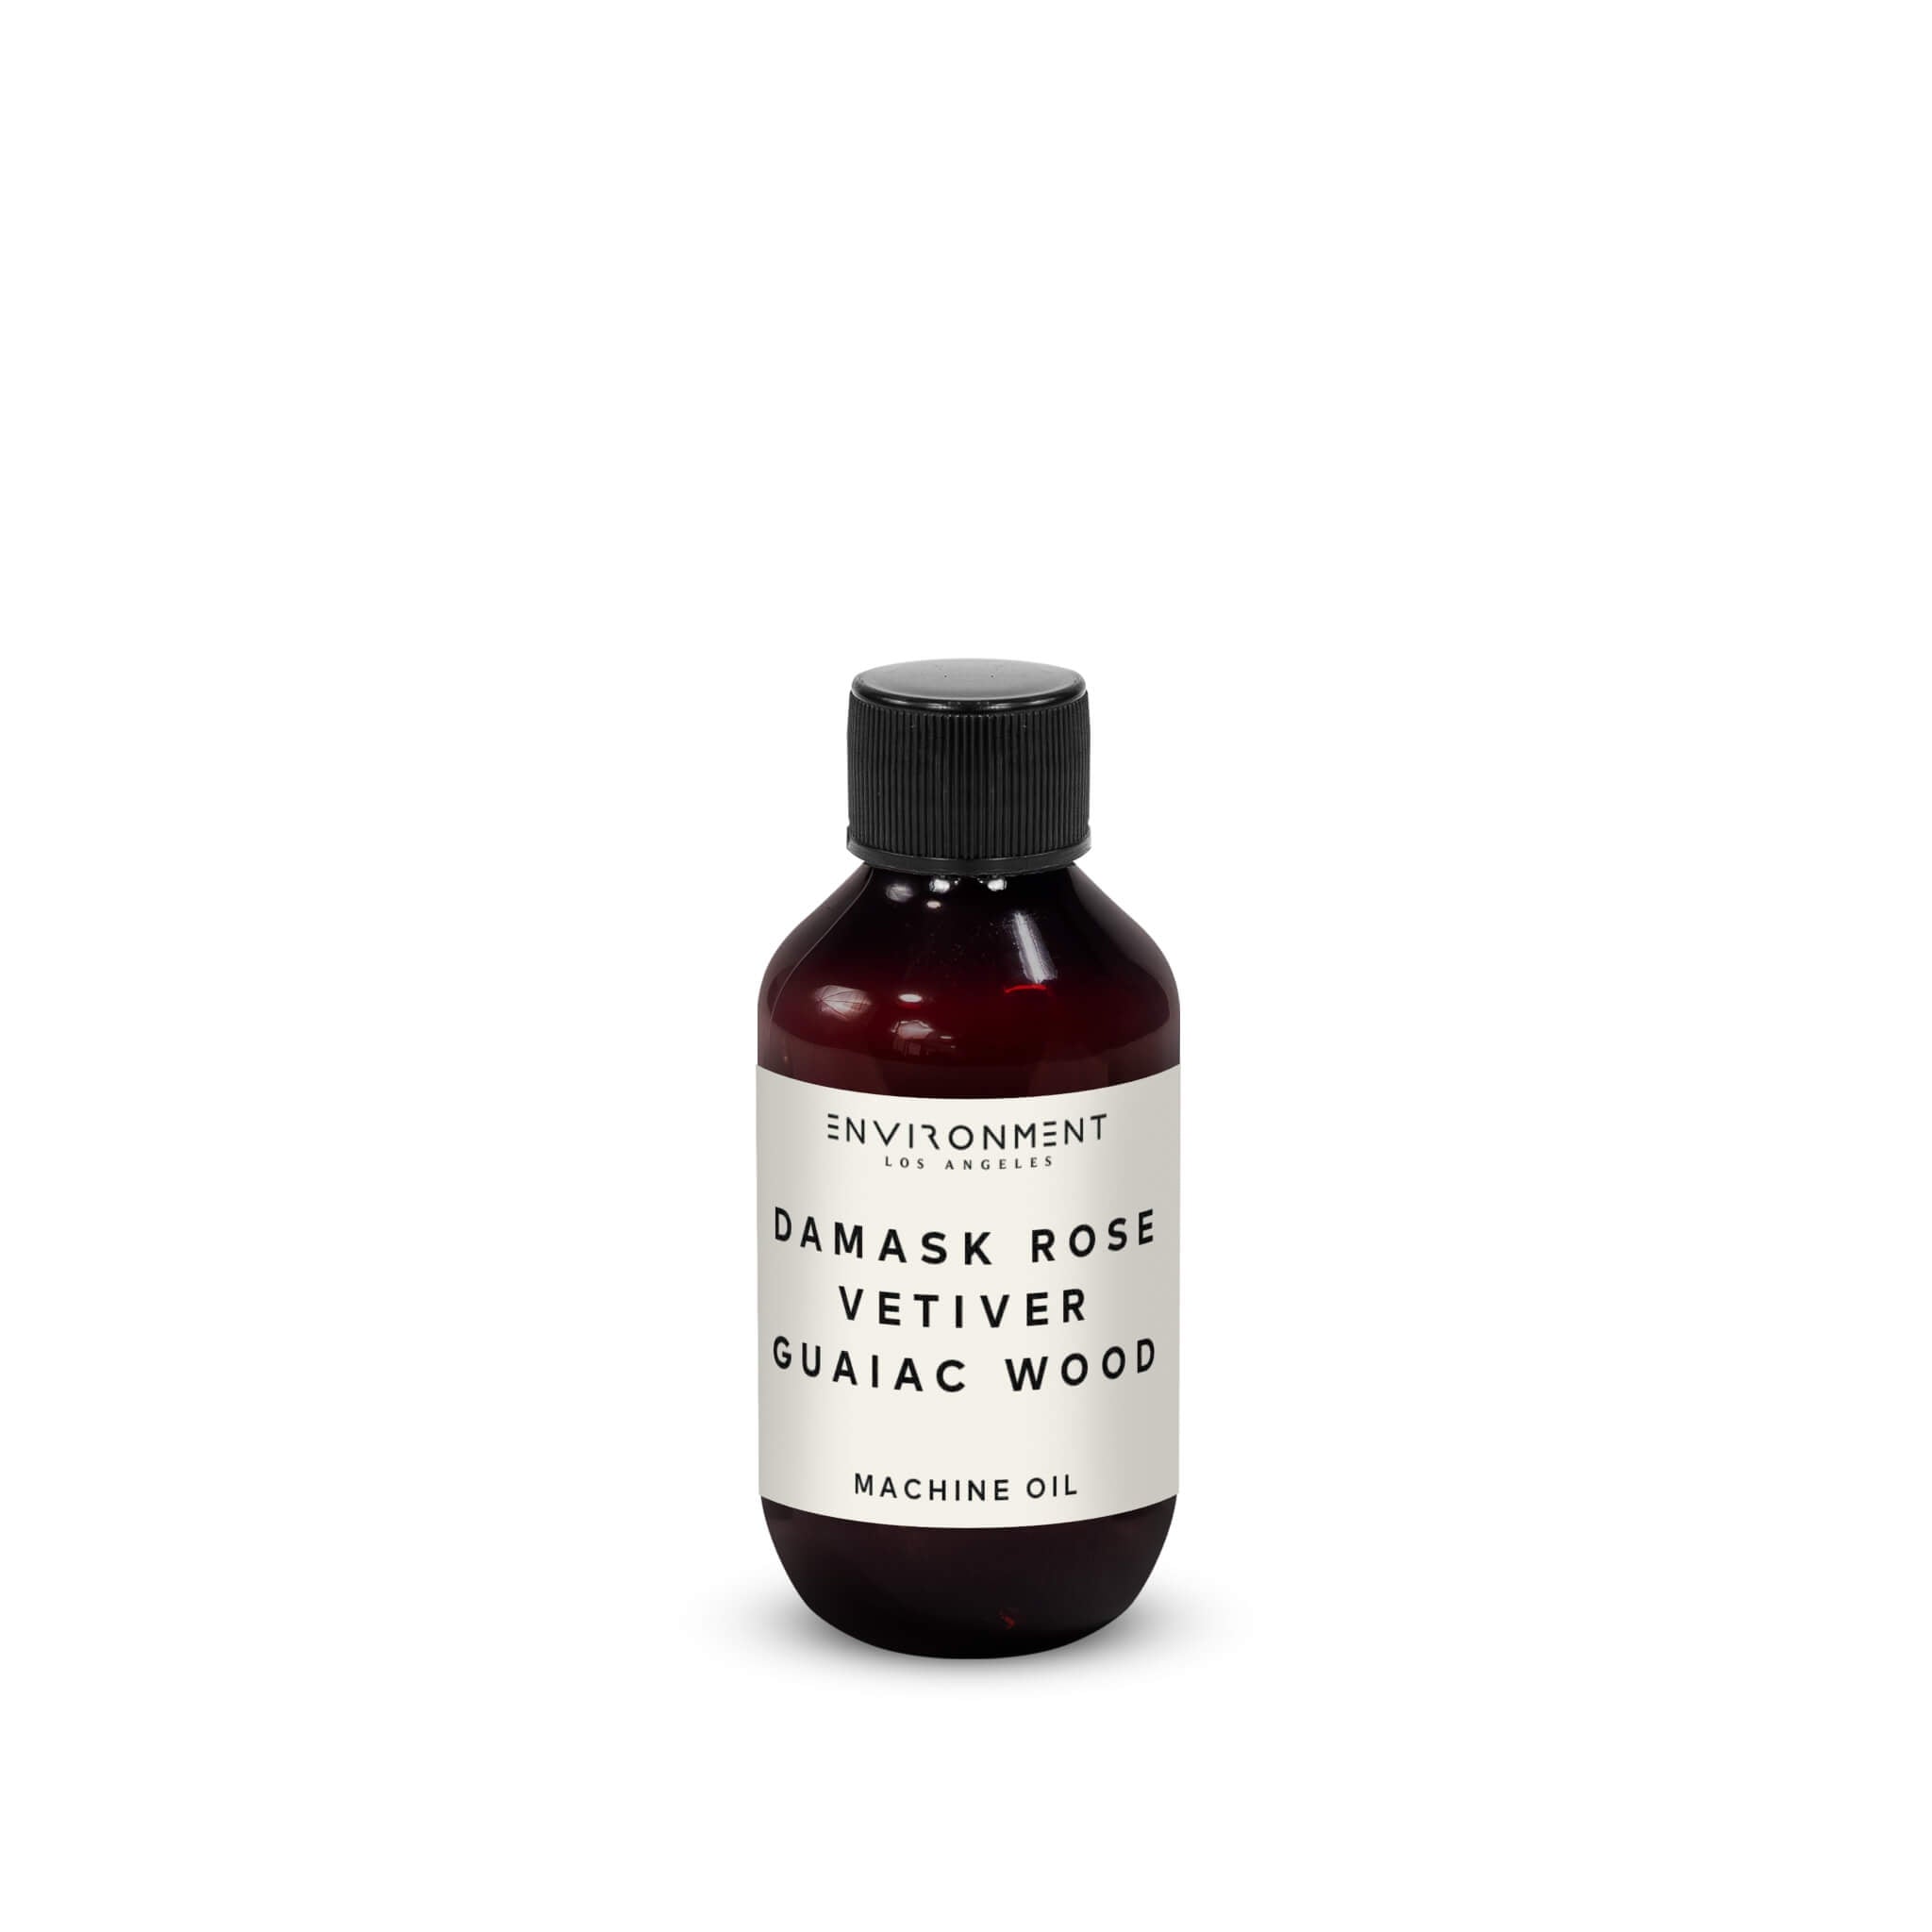 2oz Damask Rose | Vetiver | Guaiac Wood Machine Diffusing Oil (Inspired by Le Labo Rose 31® and Fairmont Hotel®)